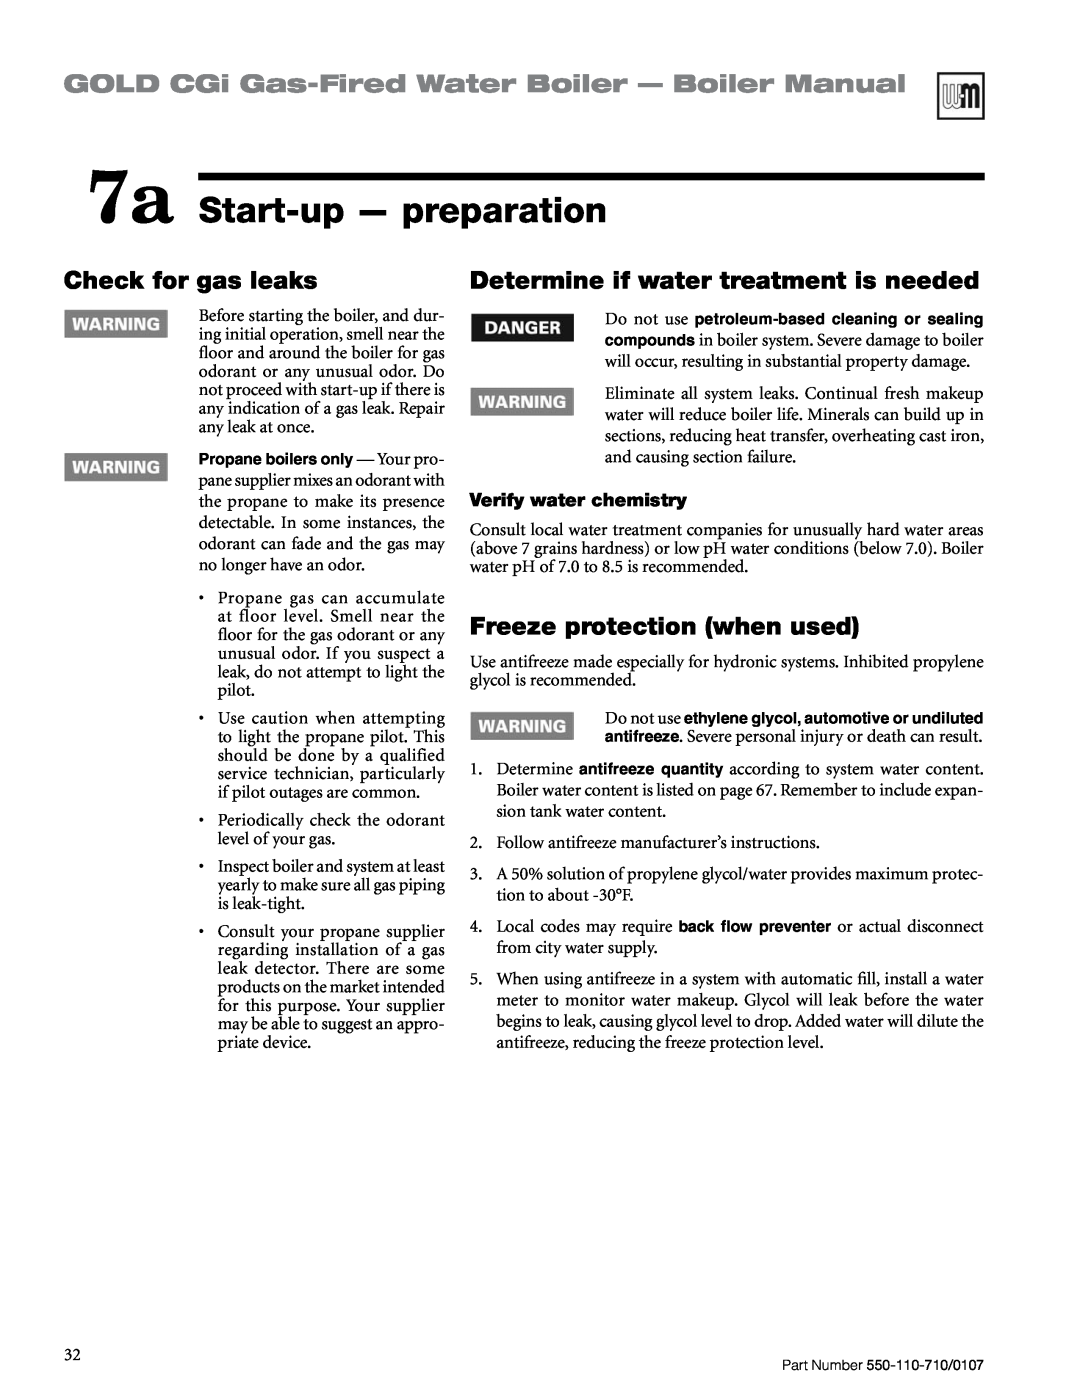 Weil-McLain Series 2 manual 7a Start-up- preparation, GOLD CGi Gas-FiredWater Boiler — Boiler Manual, Check for gas leaks 